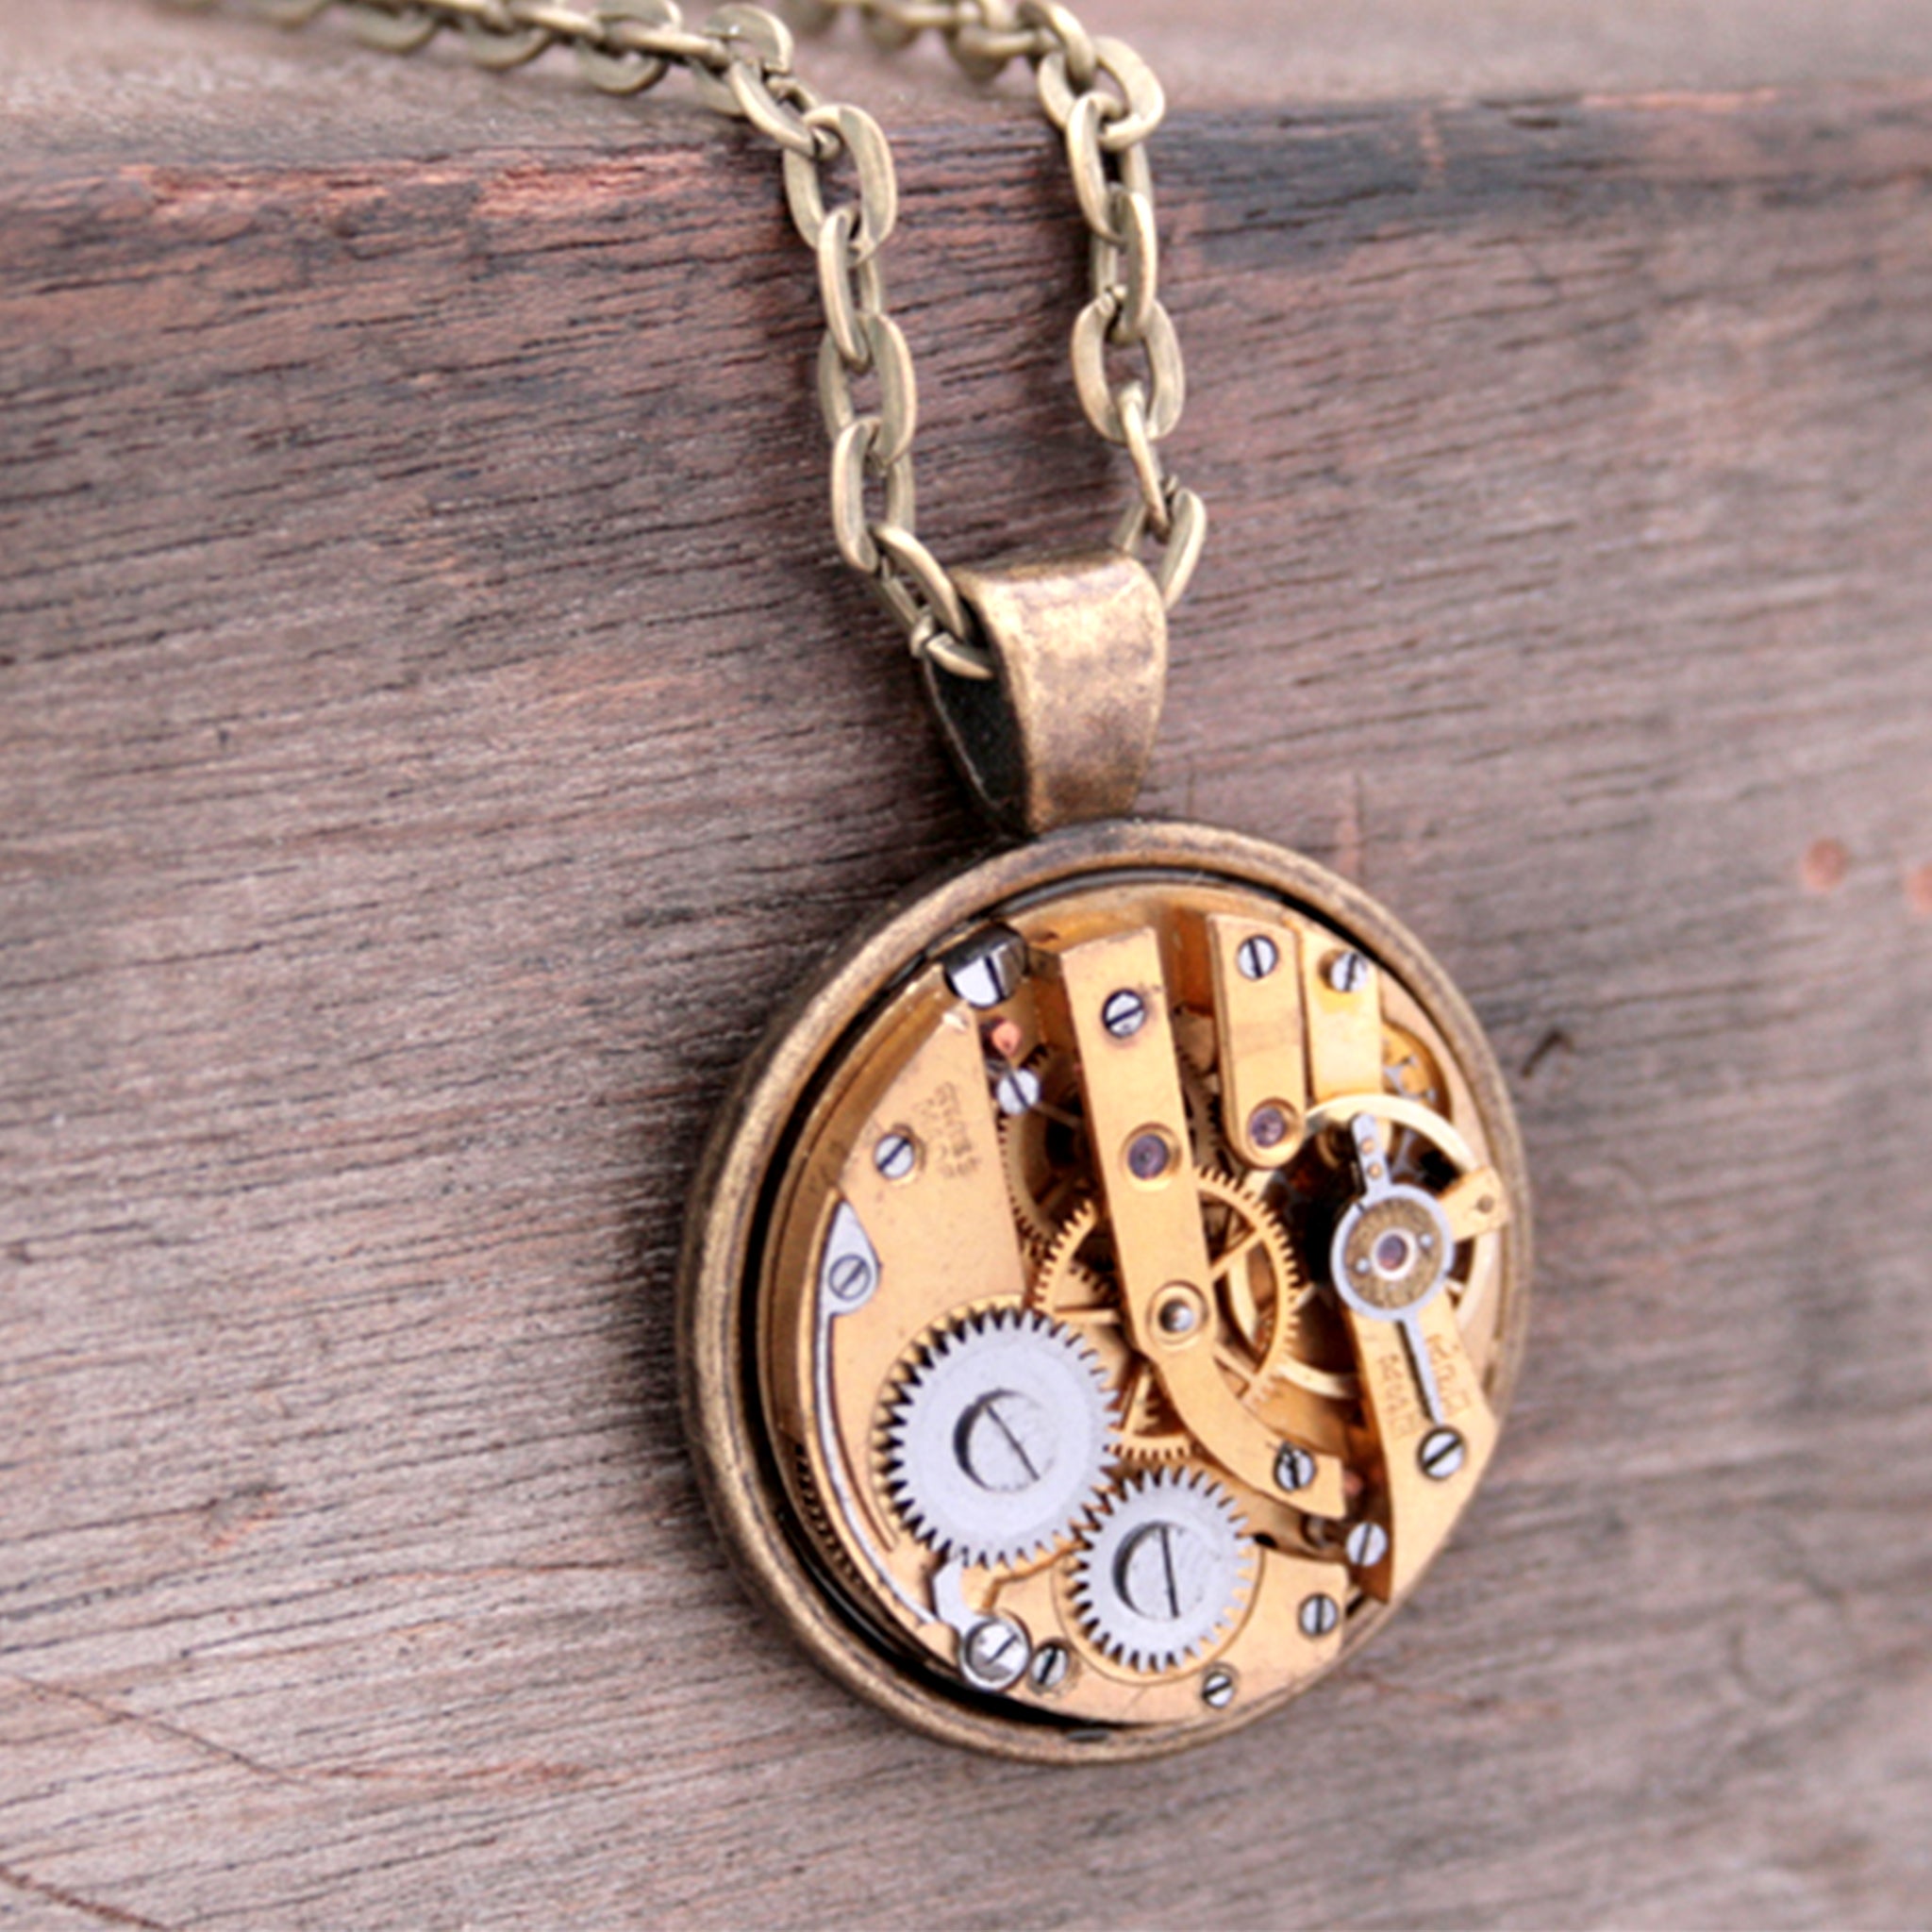 Steampunk Necklace in Gold Tone with gold watch movement